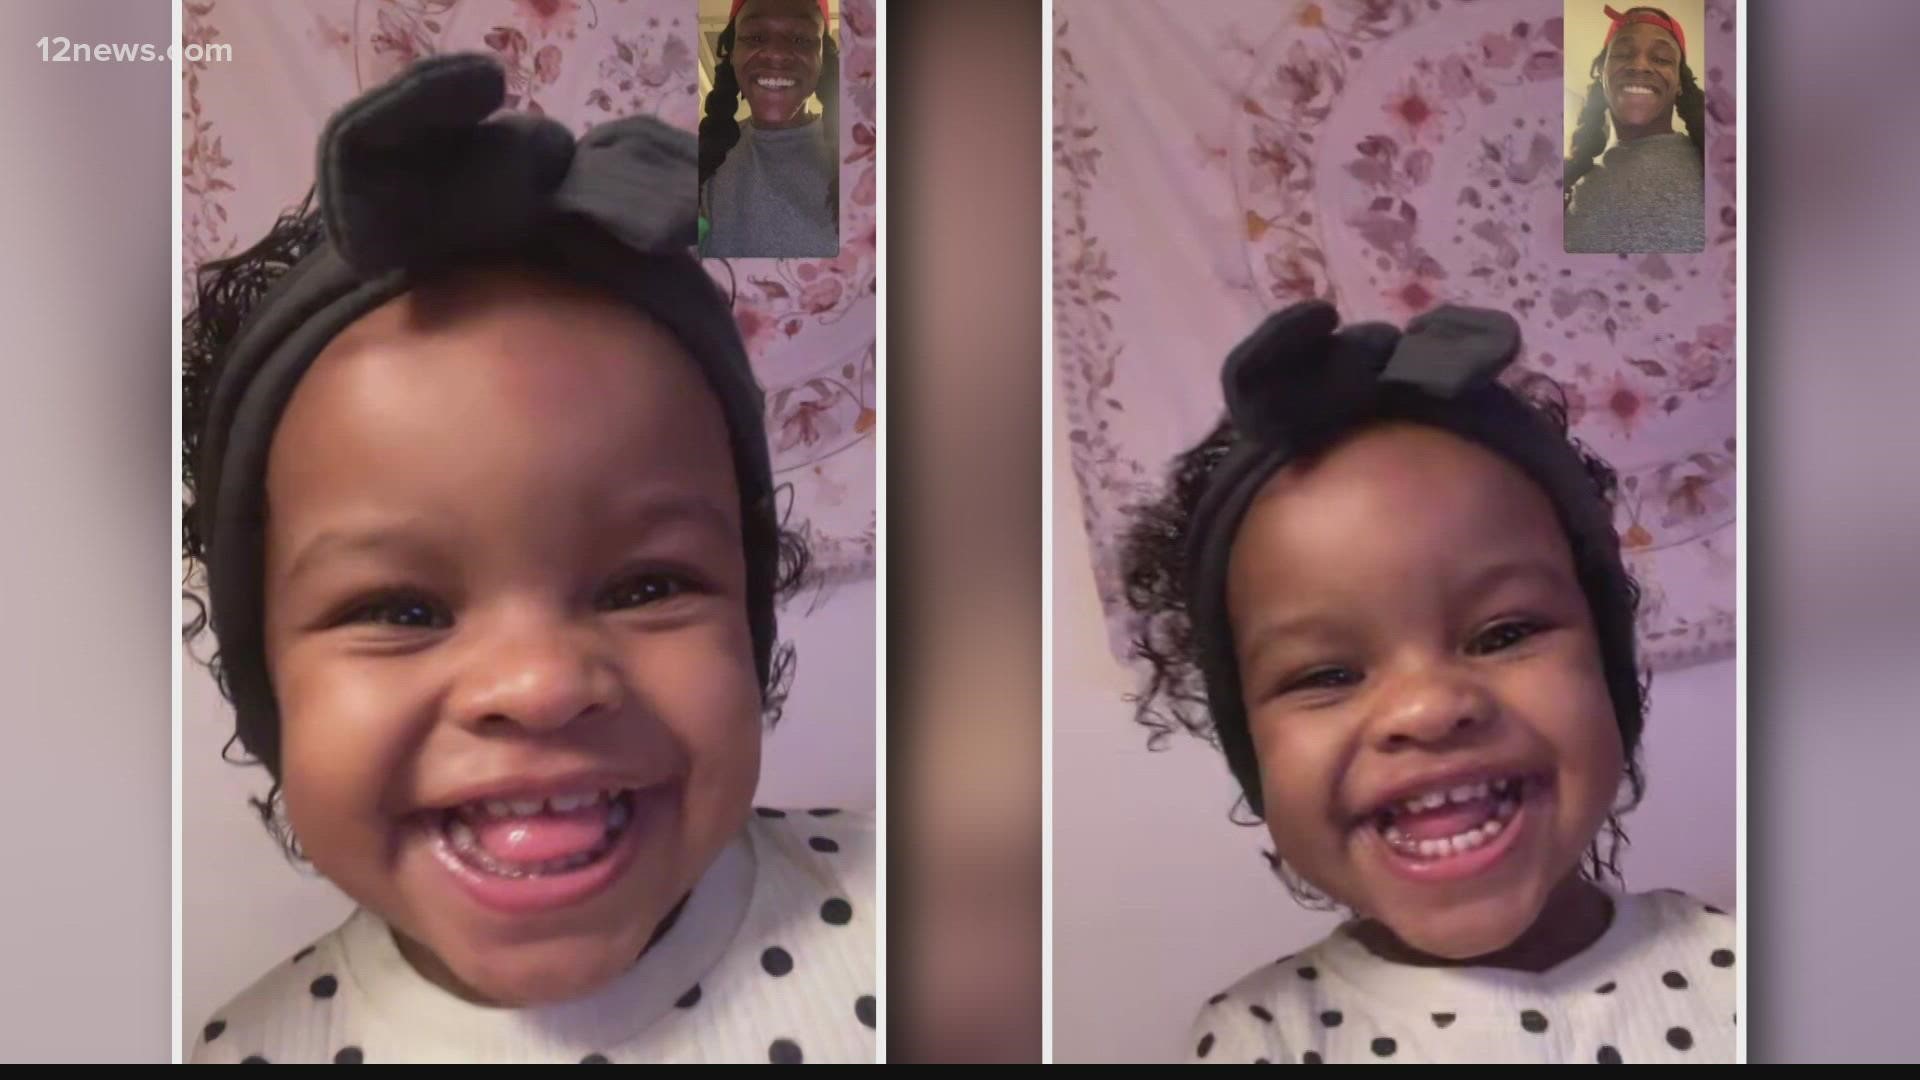 The family of a 2-year-old girl who was killed in a wrong-way crash Monday night in Tempe is speaking out. The family of Nianee Card says they are heartbroken.